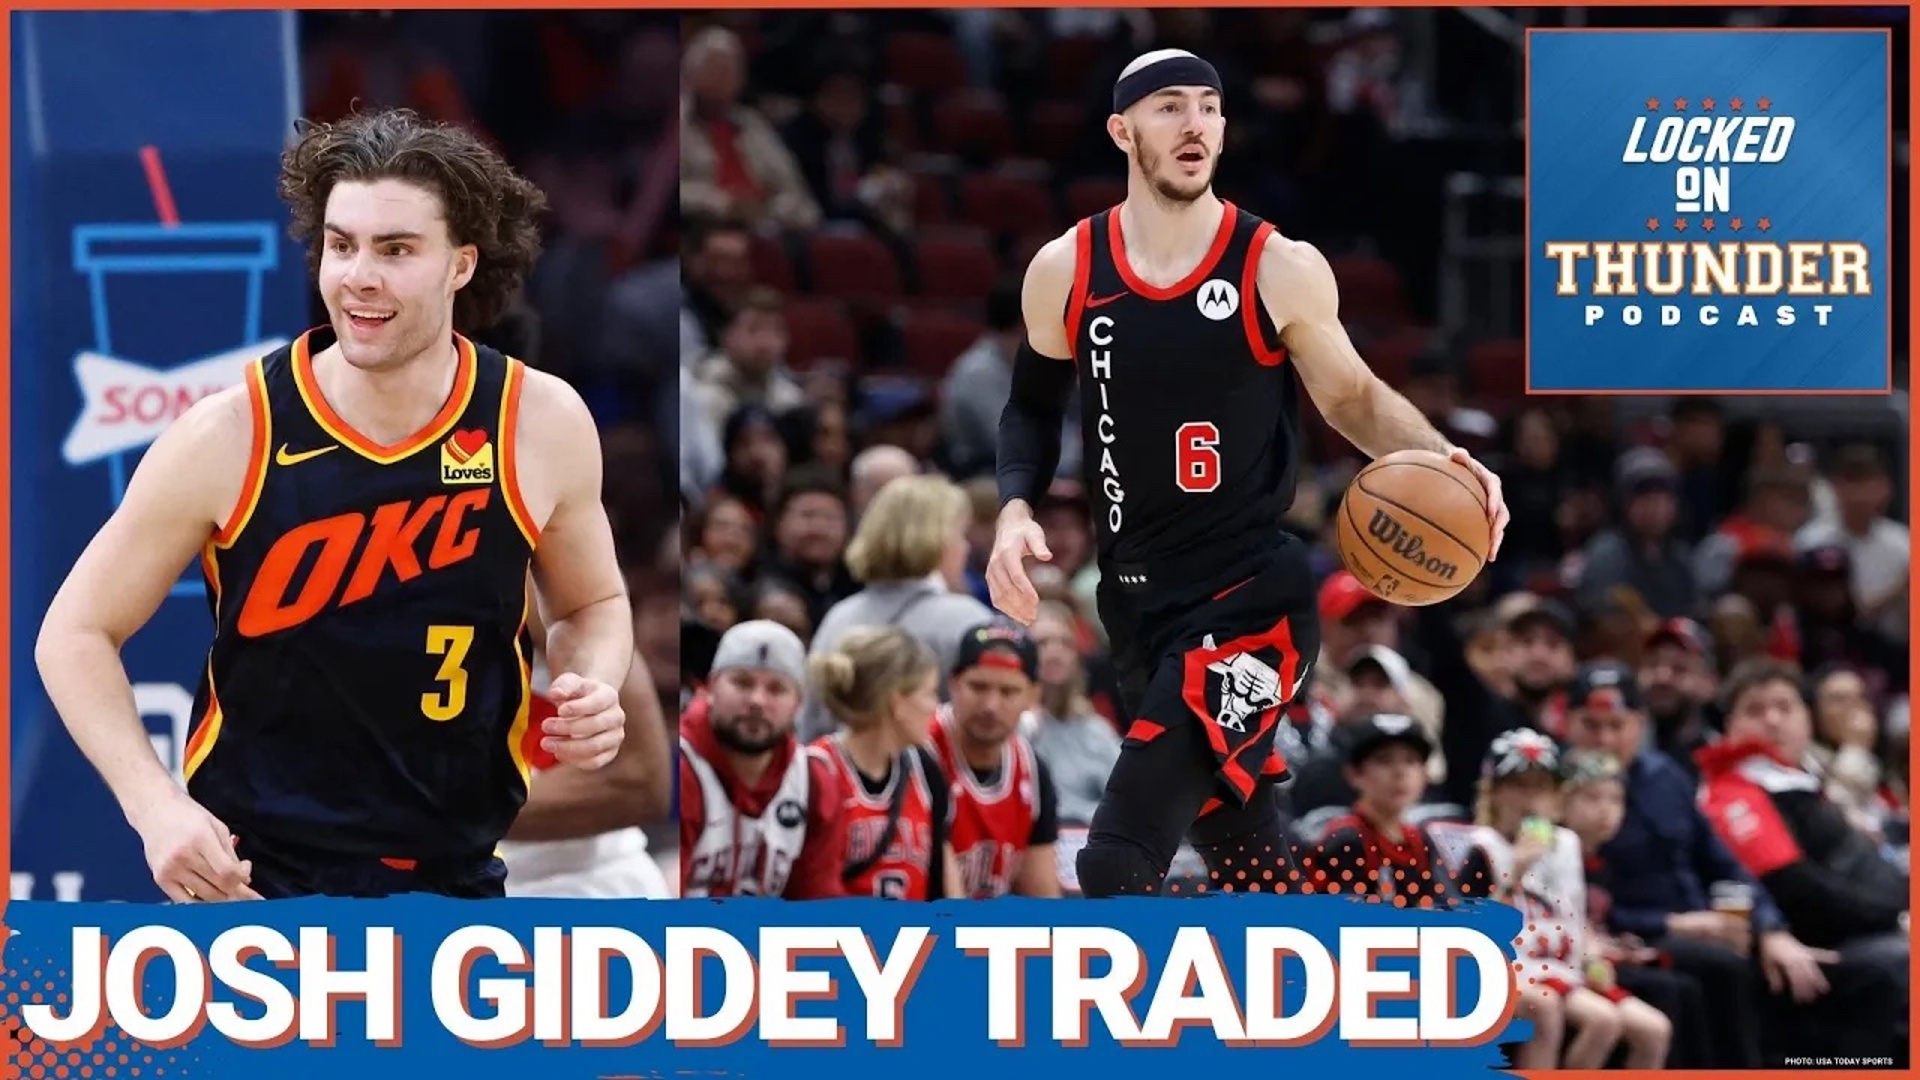 The Oklahoma City Thunder have traded former No. 6 overall pick Josh Giddey to the Chicago Bulls for Alex Caruso, and the OKC Thunder got a lot better.